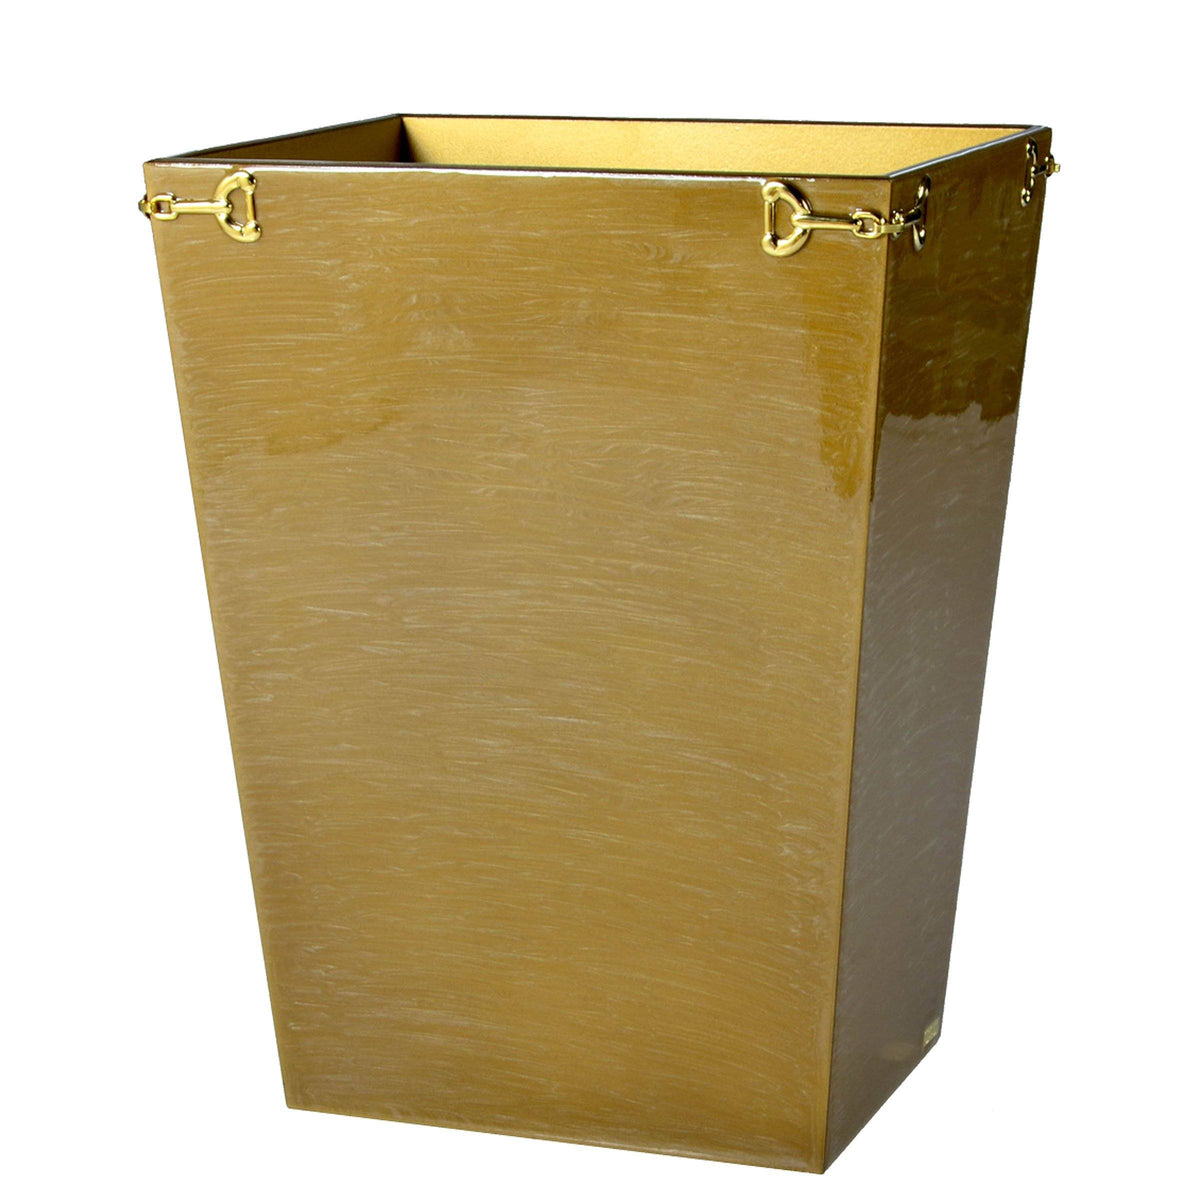 Mike and Ally Hampton Bath Accessories Cocoa Gold Waste Basket